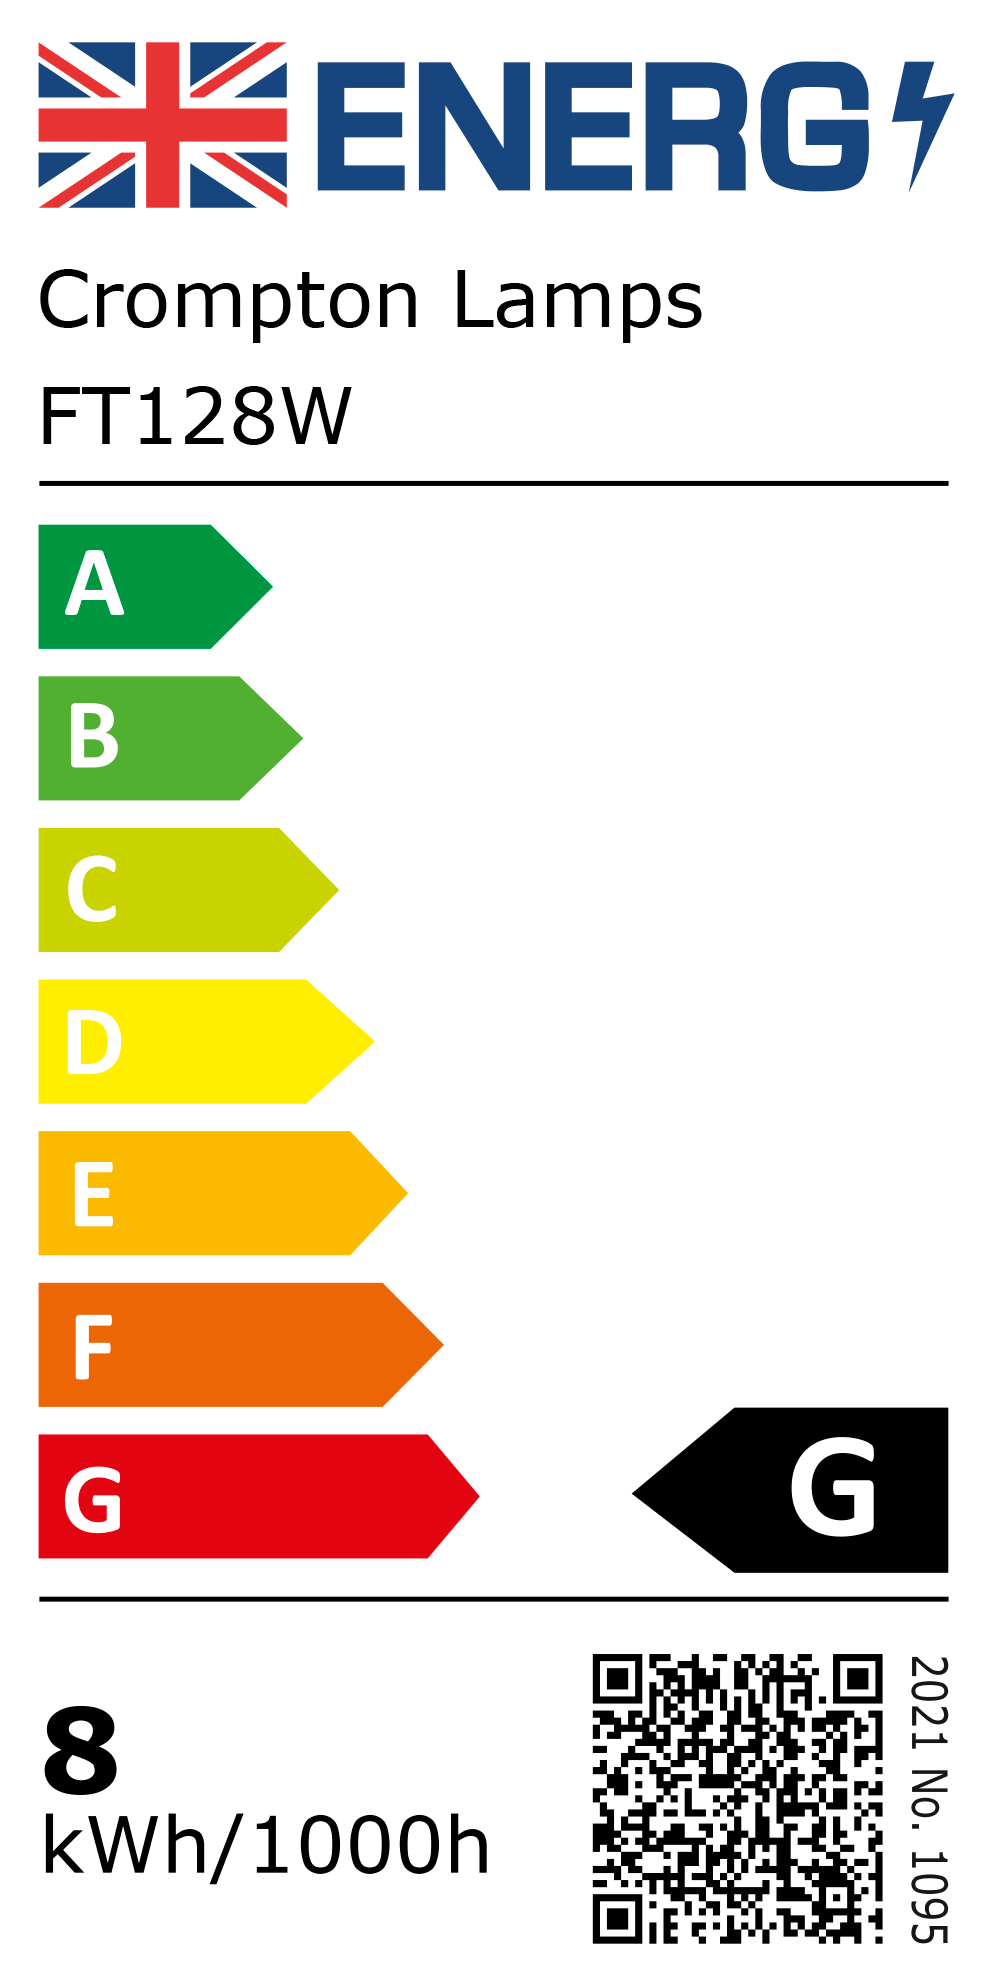 New 2021 Energy Rating Label: MPN FT128W